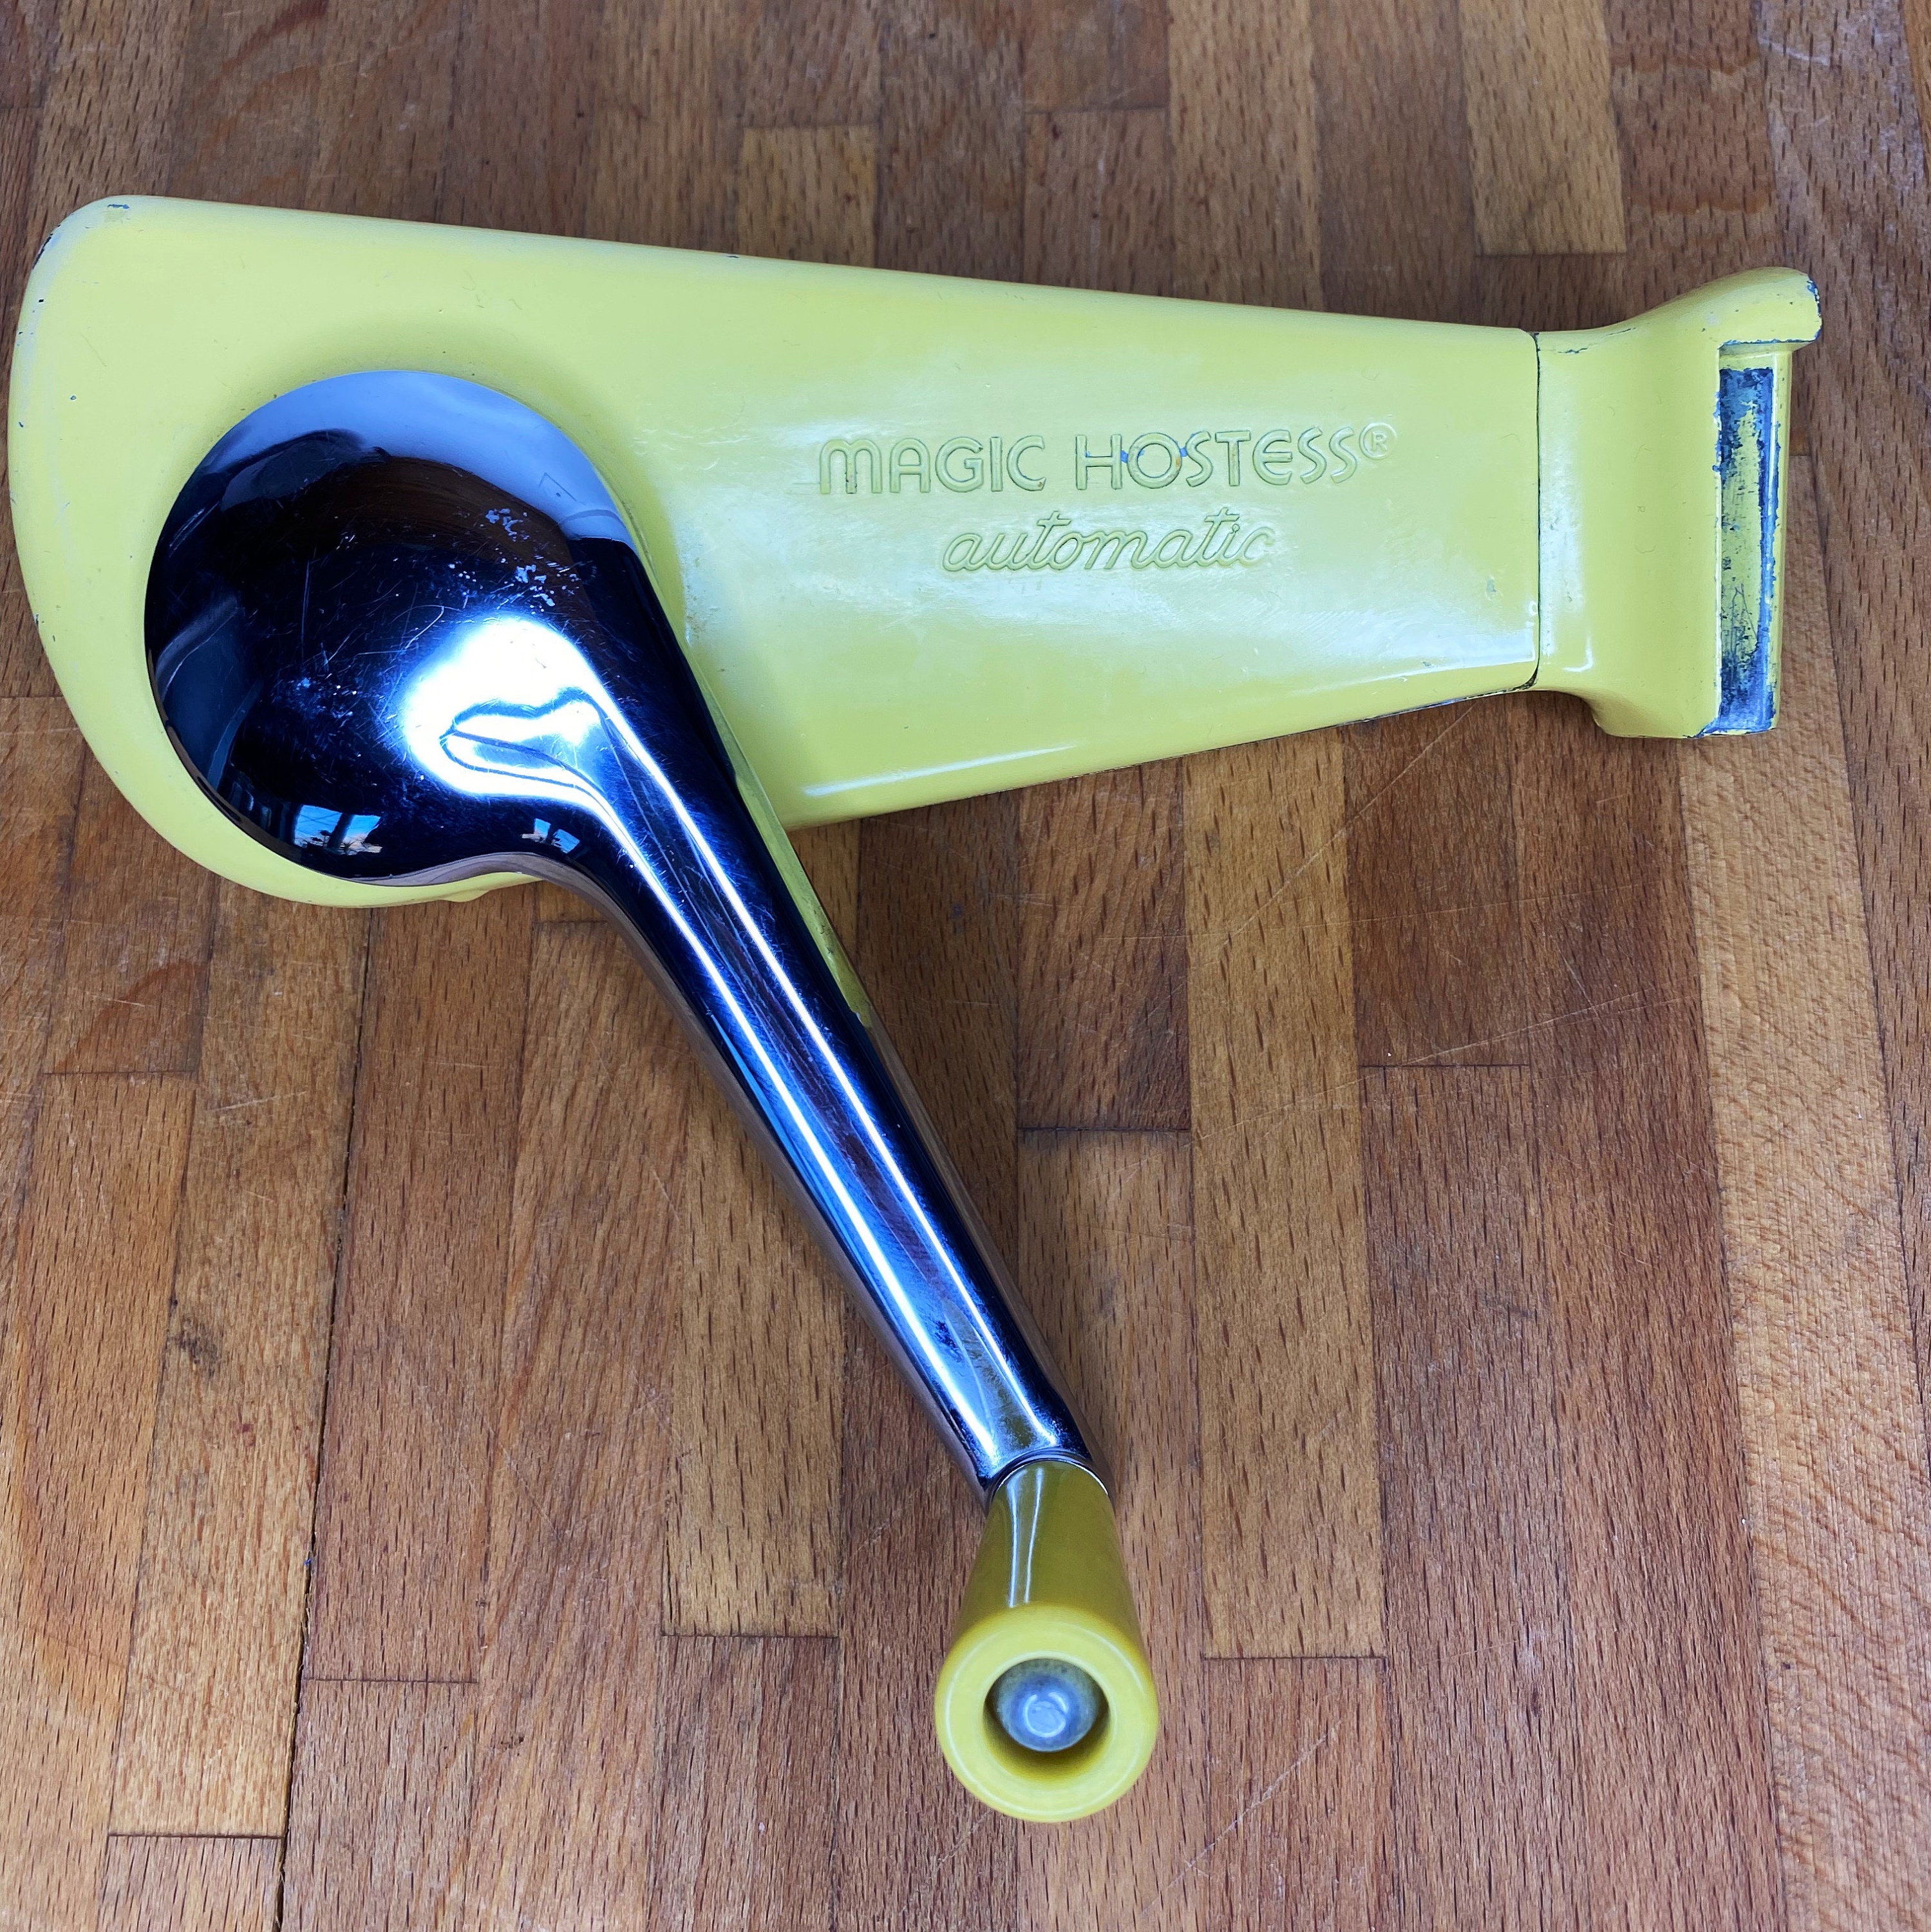 Vintage Magic Hostess Automatic Wall Mount Can Opener.